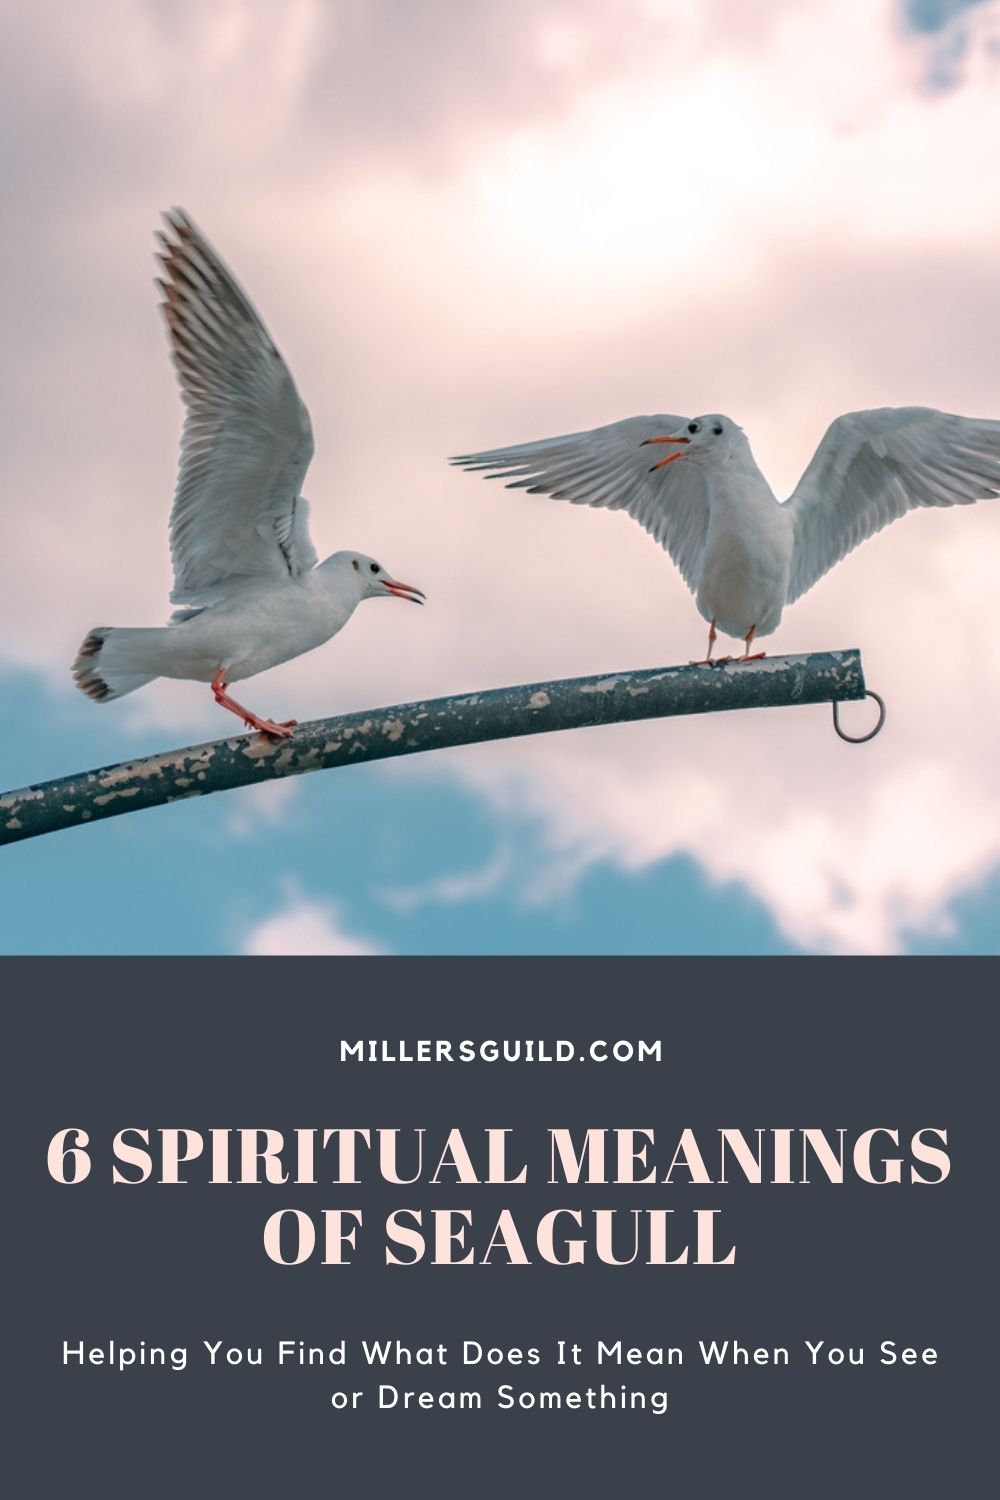 6 Spiritual Meanings of Seagull